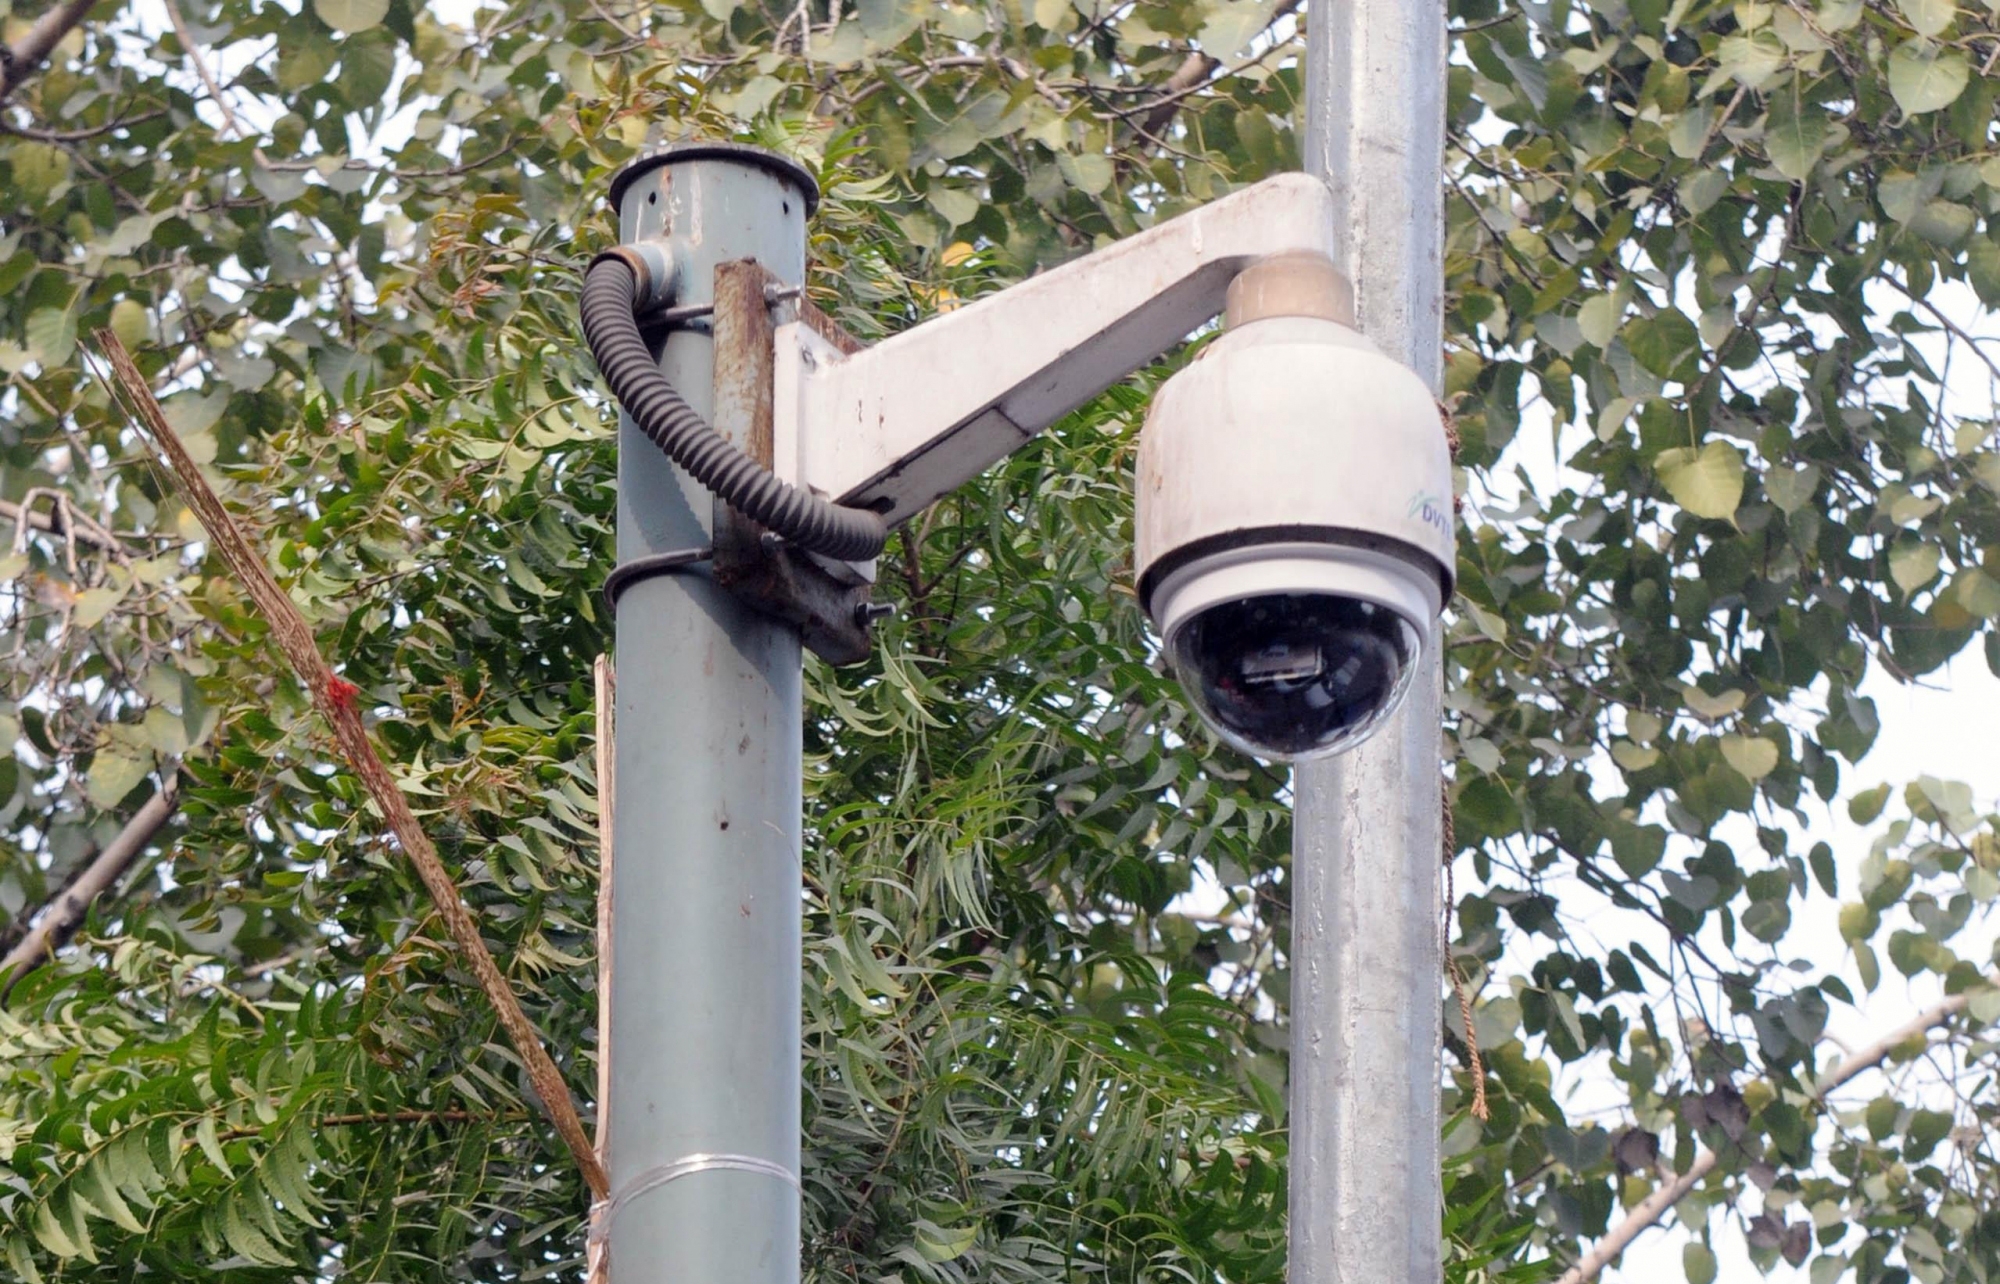 One CCTV camera helped trace driver in Delhi BMW hit-and-run case - Bhaskar Live English News